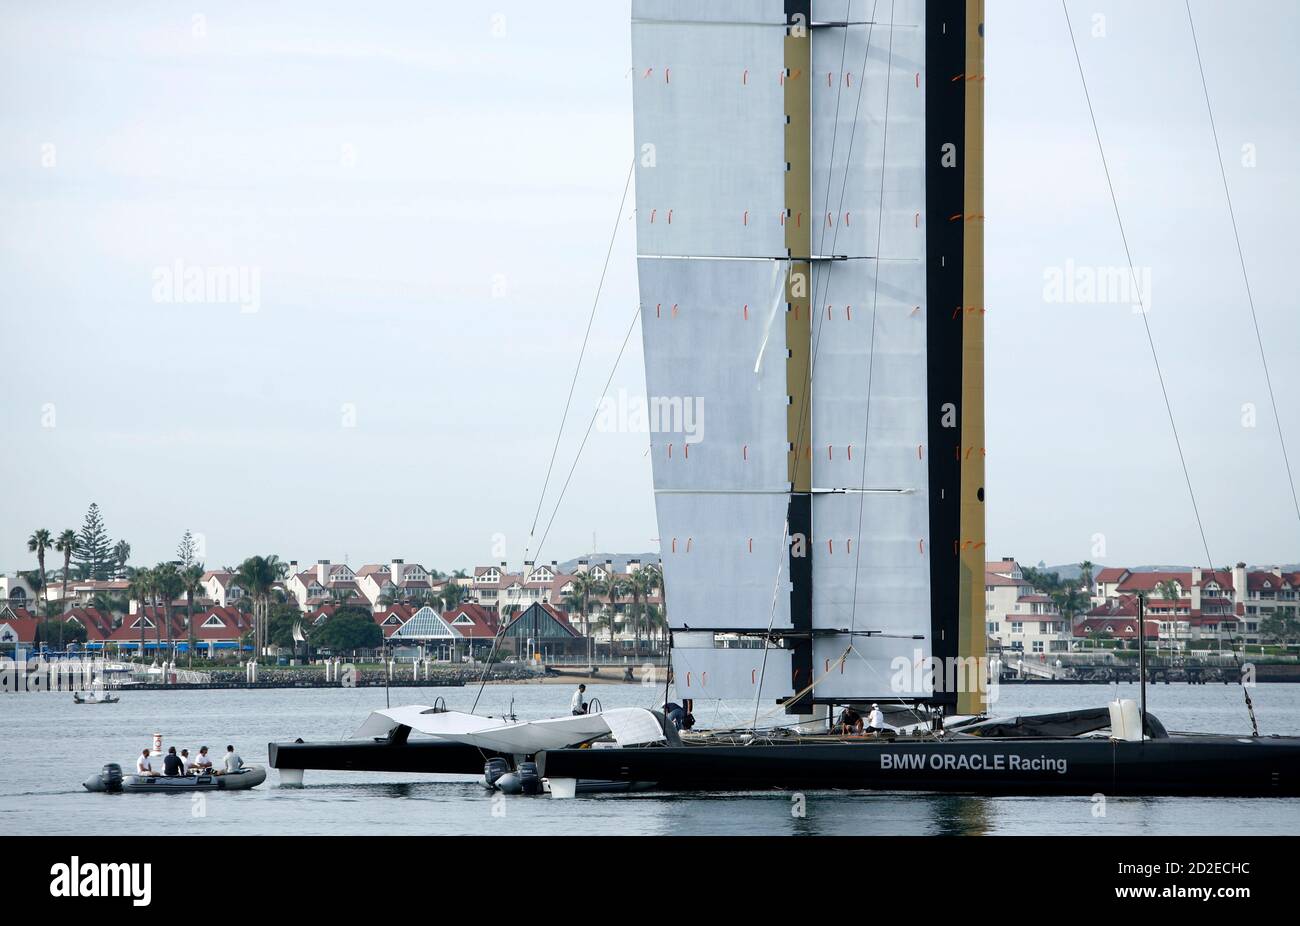 BMW Oracle Racing debuts a radical new 190-foot airplane like hard wing  sail on its BOR90 trimaran in San Diego, California, November 11, 2009.  Towering nearly 190 ft (57 m) above the